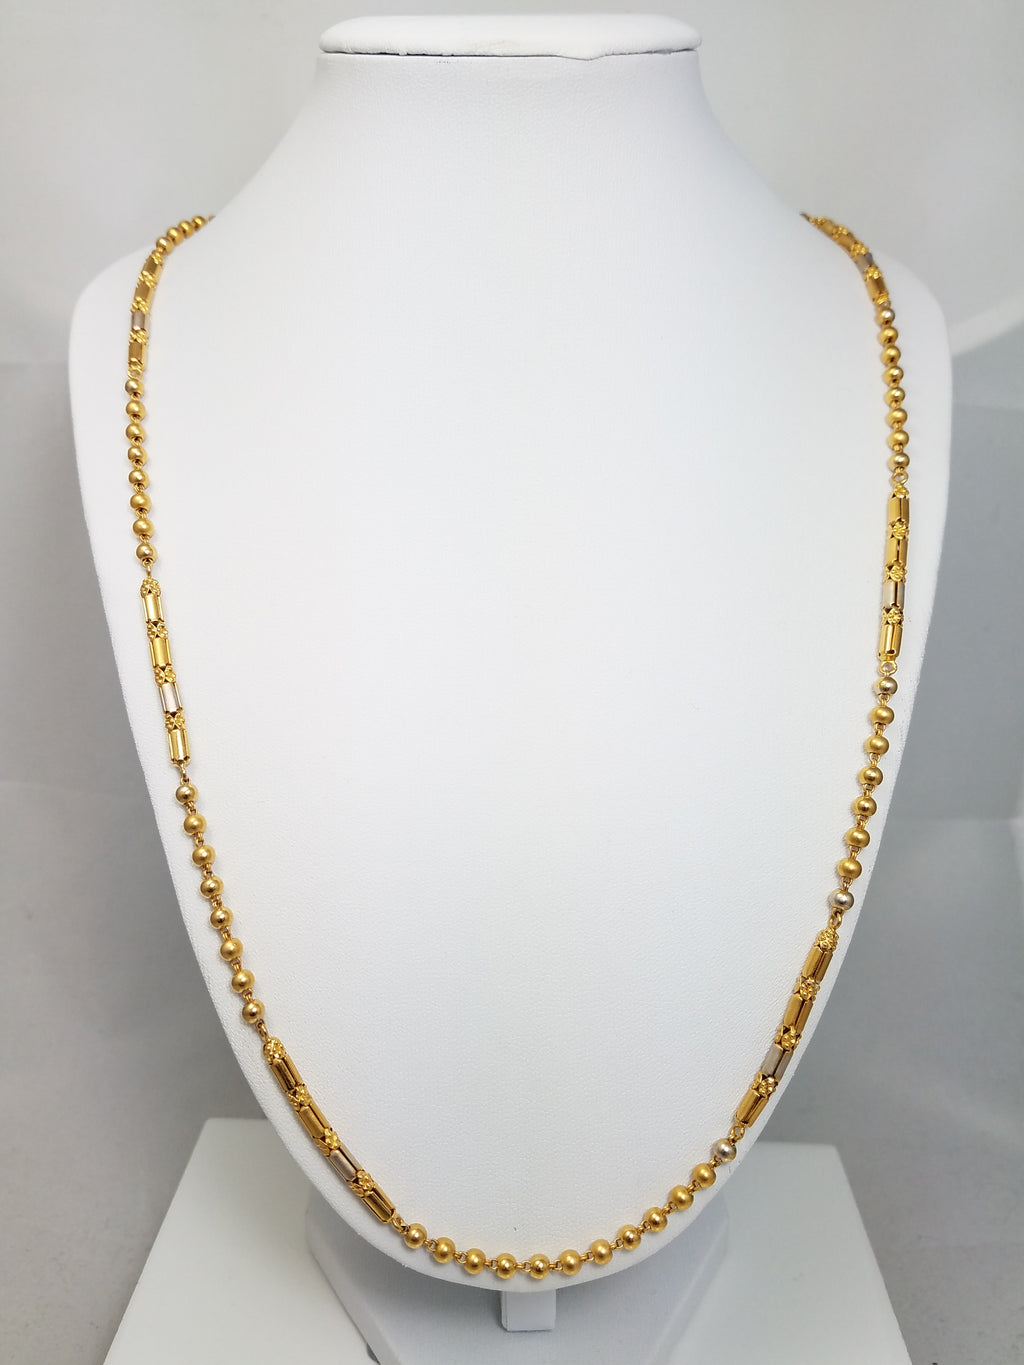 Stunning 25" 22k Two Tone Gold Hollow Bead Necklace